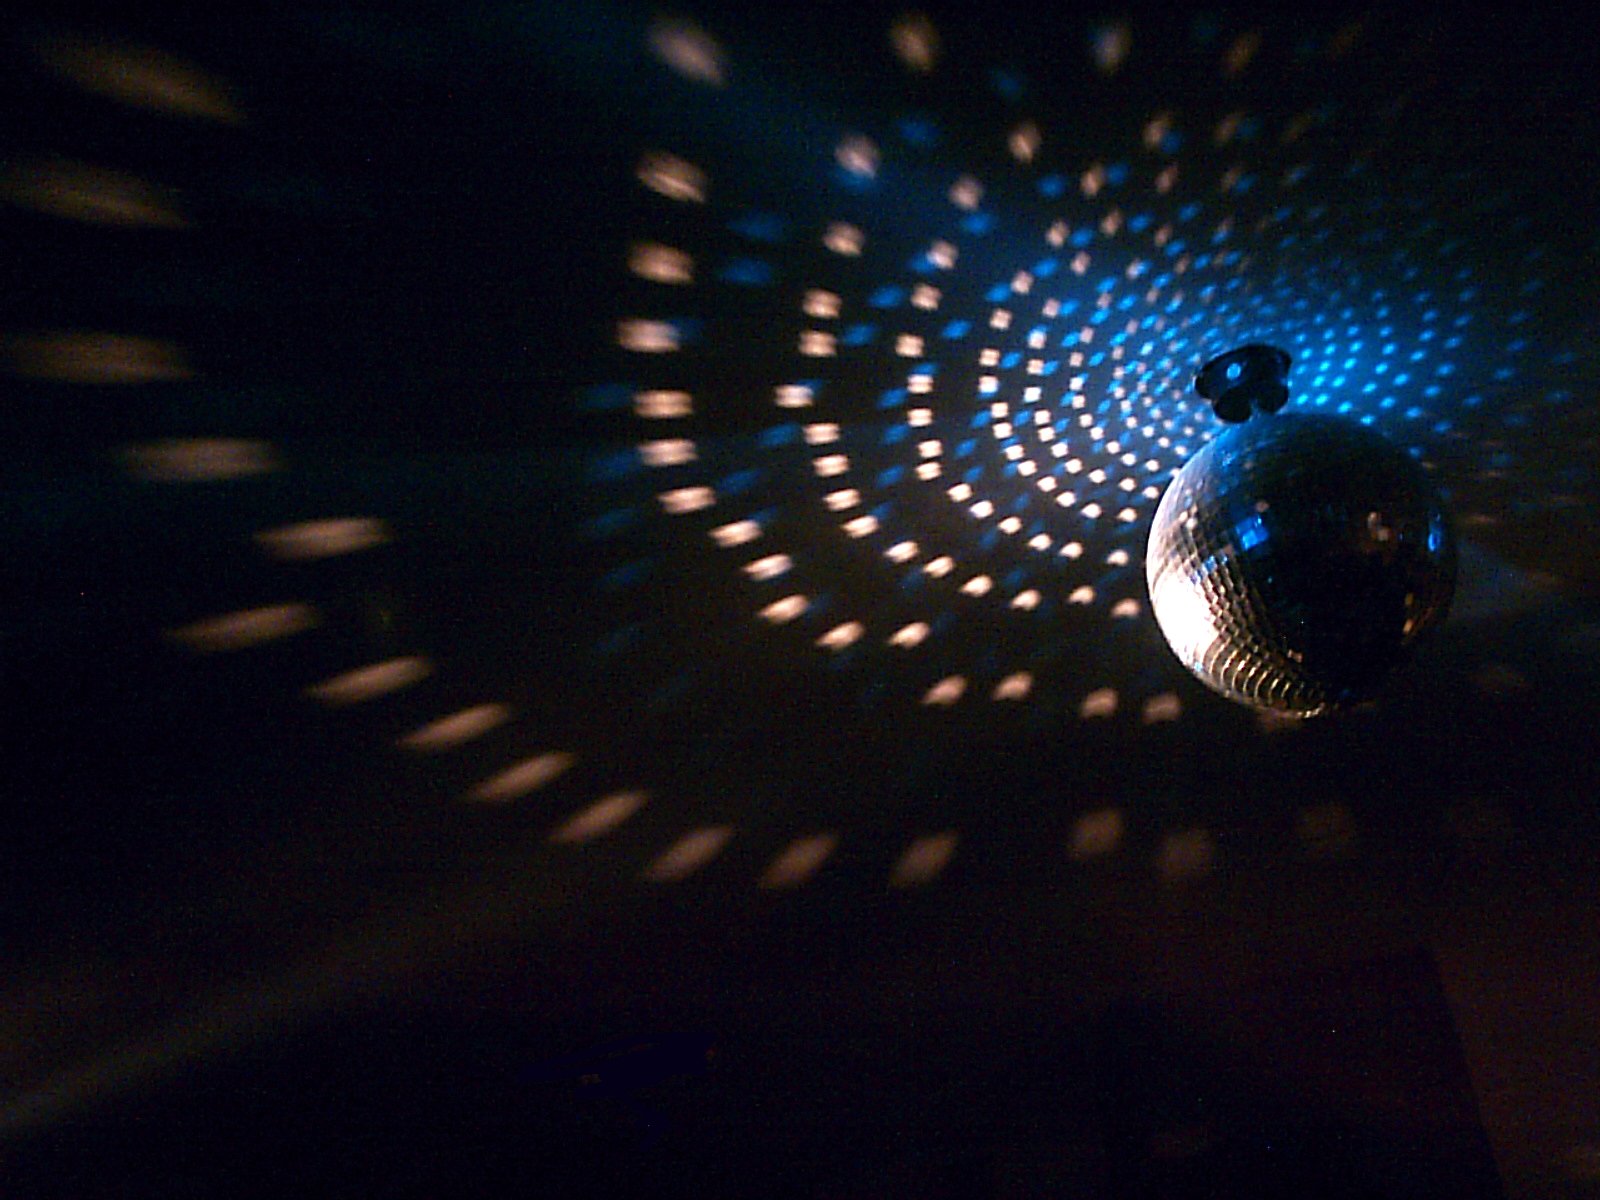 the reflection of a disco ball on the wall